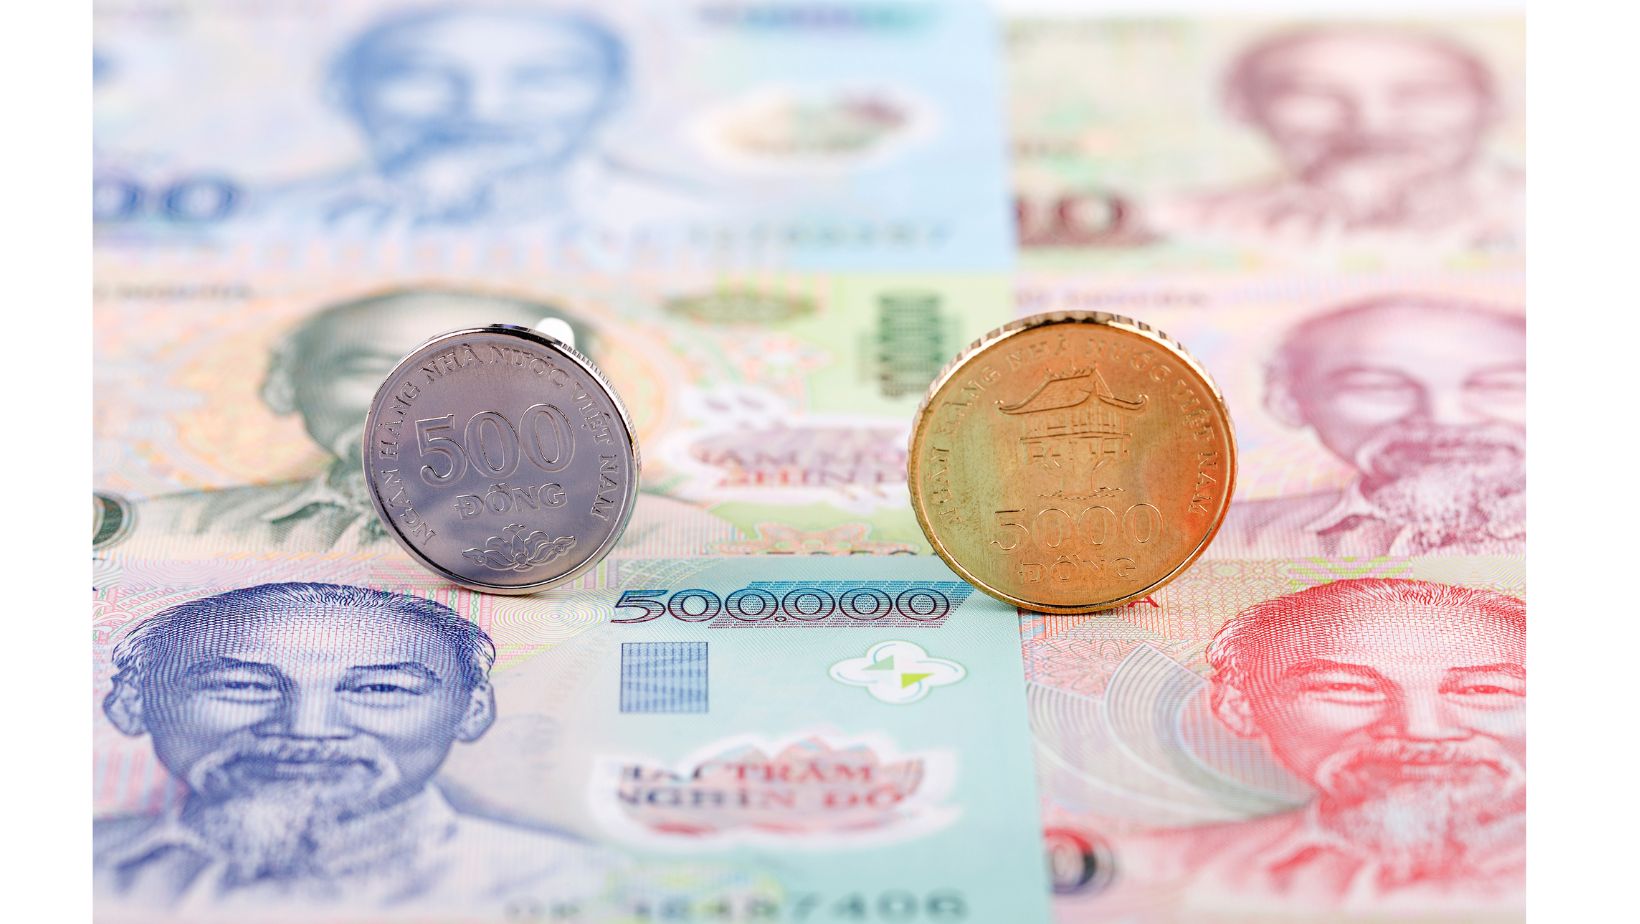 Vietnamese banknotes and coins